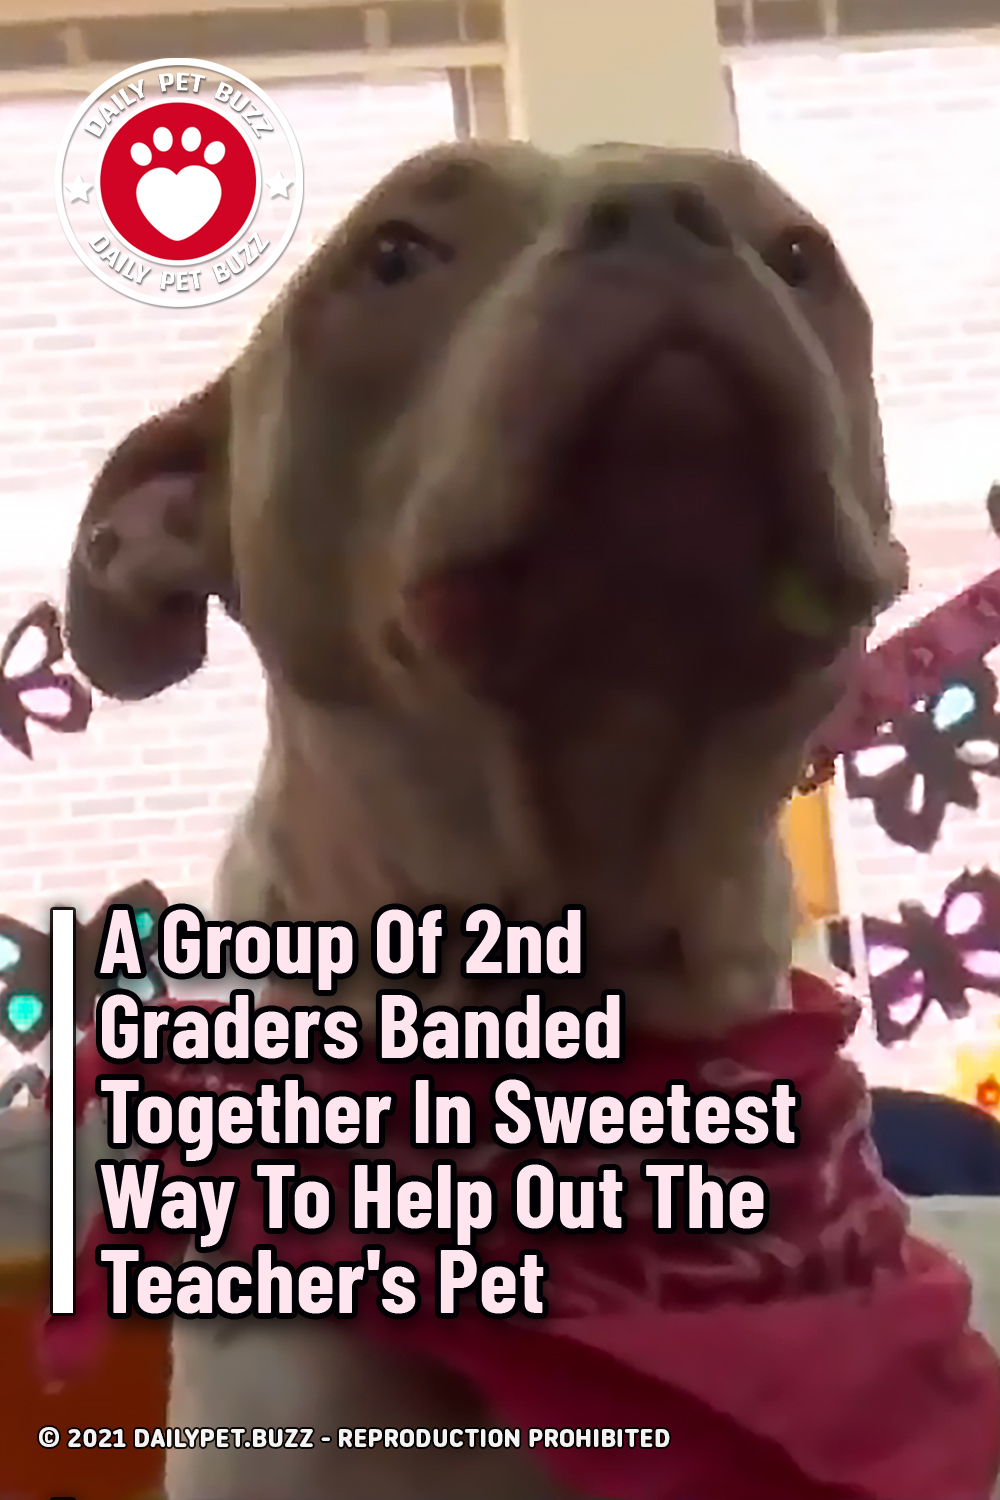 A Group Of 2nd Graders Banded Together In Sweetest Way To Help Out The Teacher\'s Pet